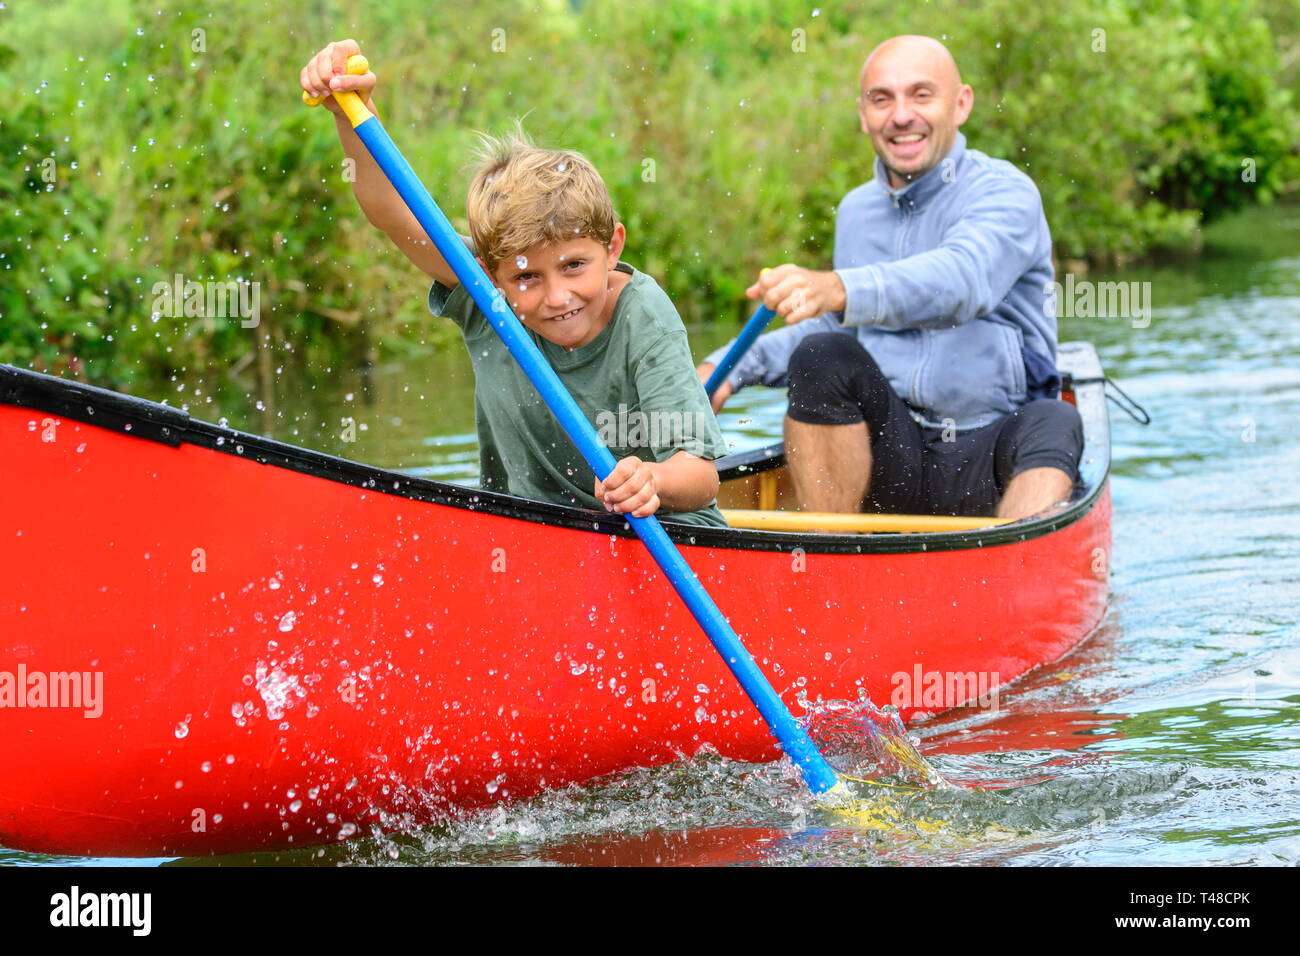 Young boy paddling eagerly with his father in canoe Stock Photo